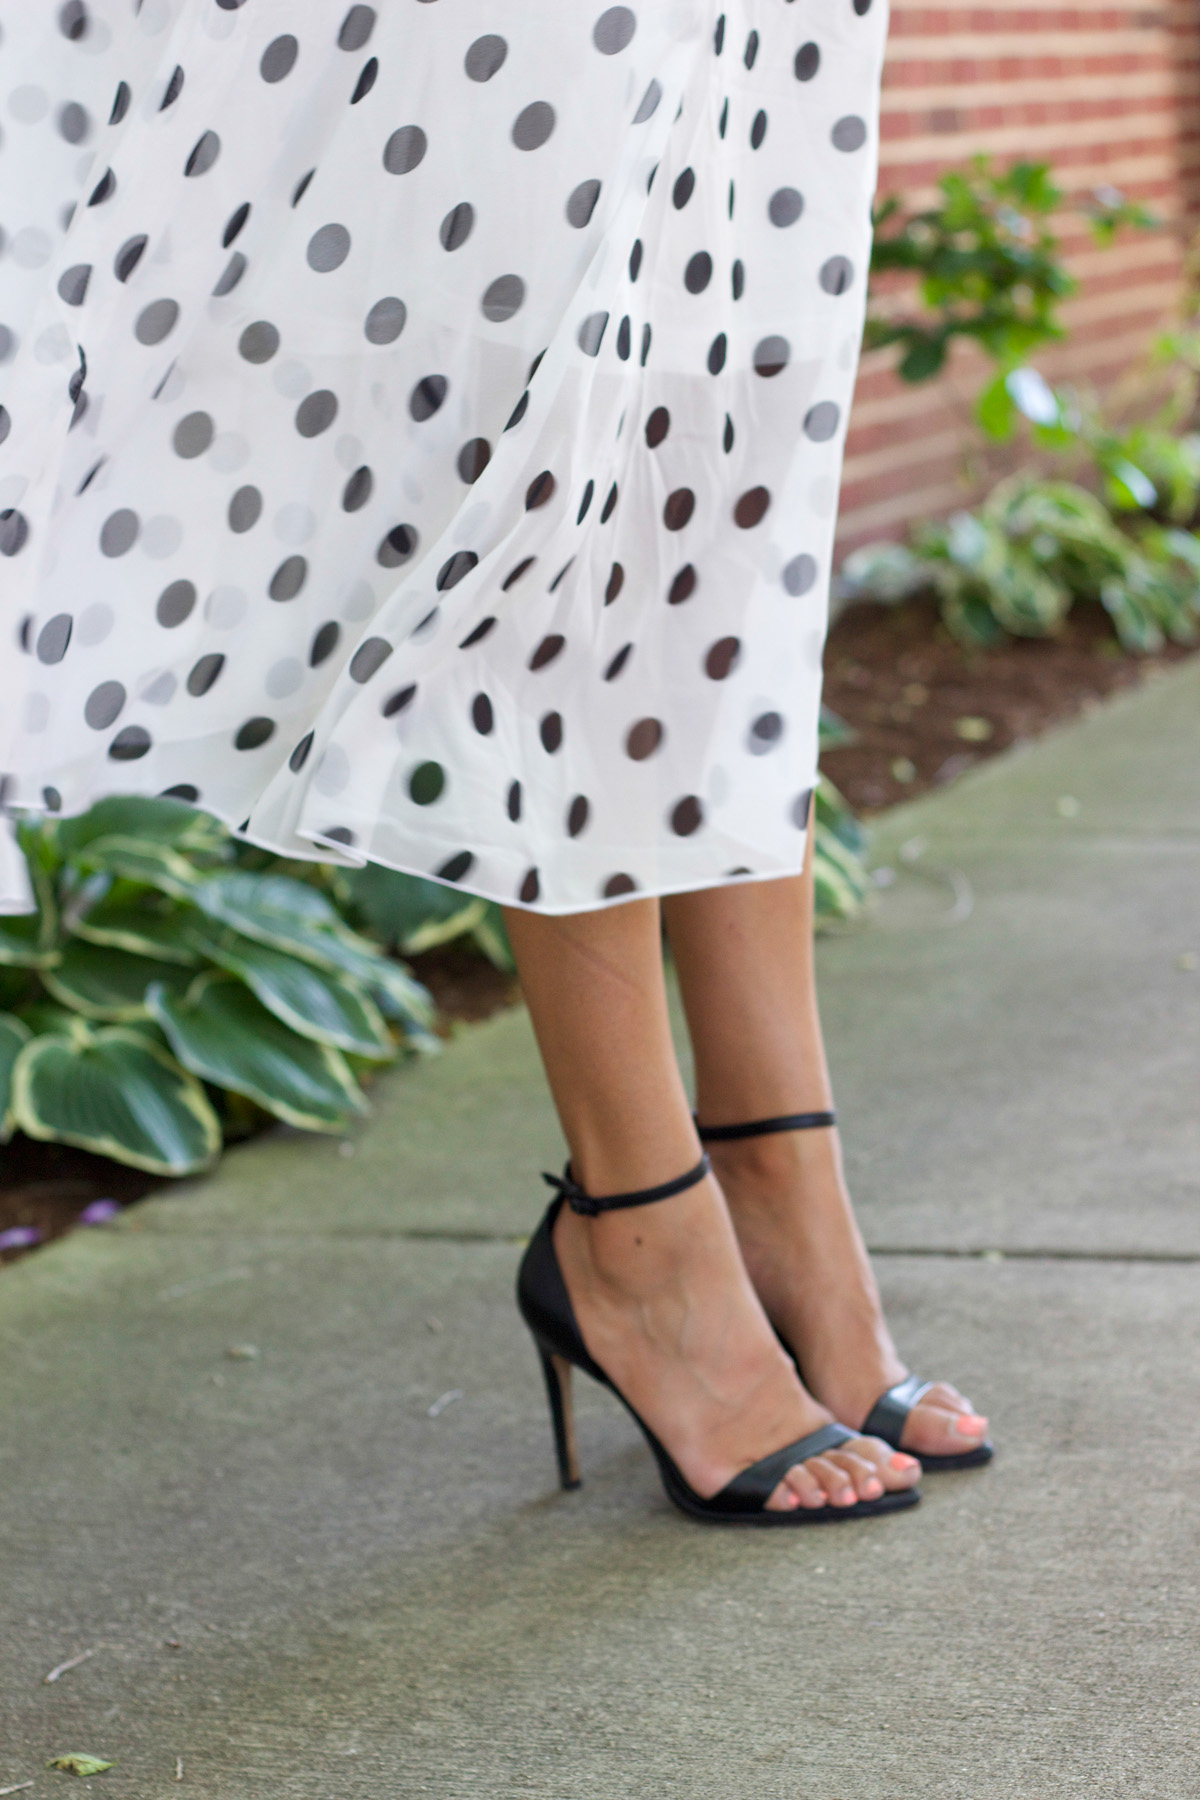 Dainty Polka Dot Dress | Lows to Luxe